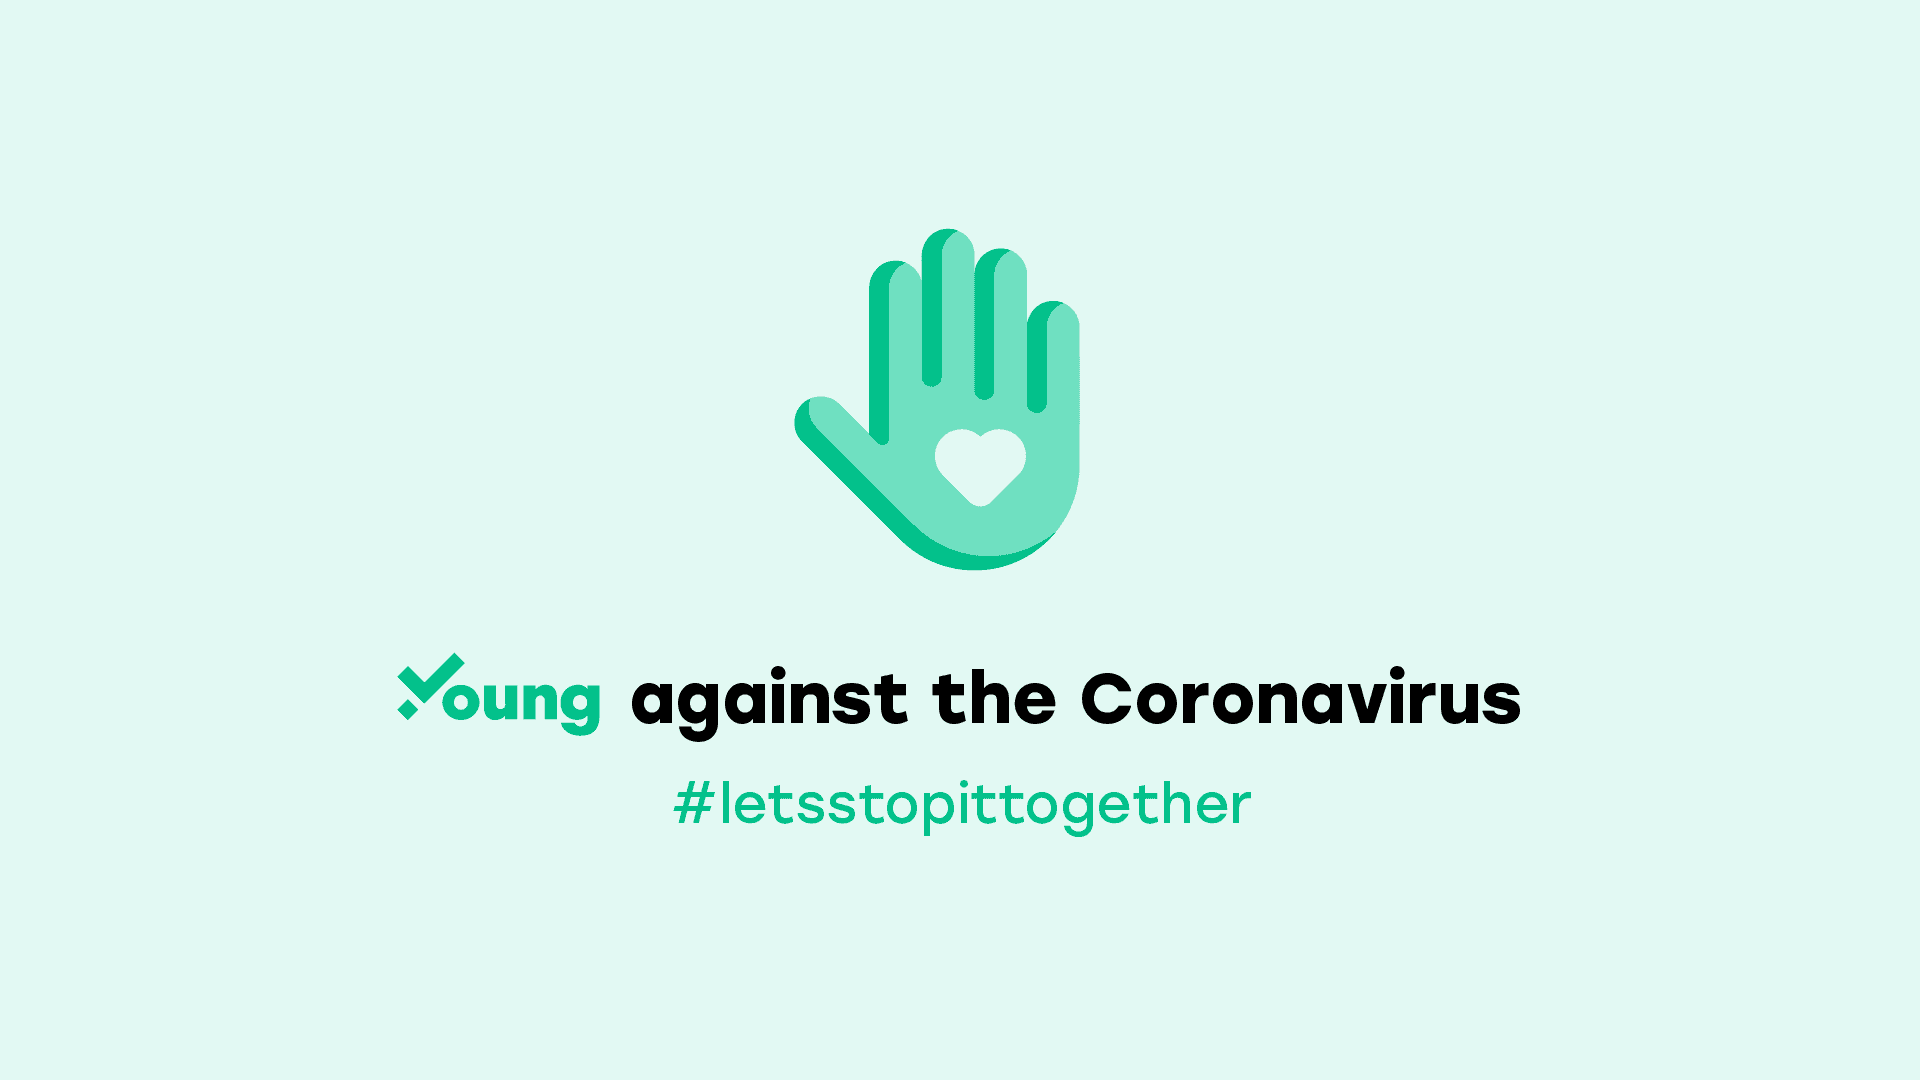 Join Young Platform and the Italian Red Cross in the fight against the Coronavirus